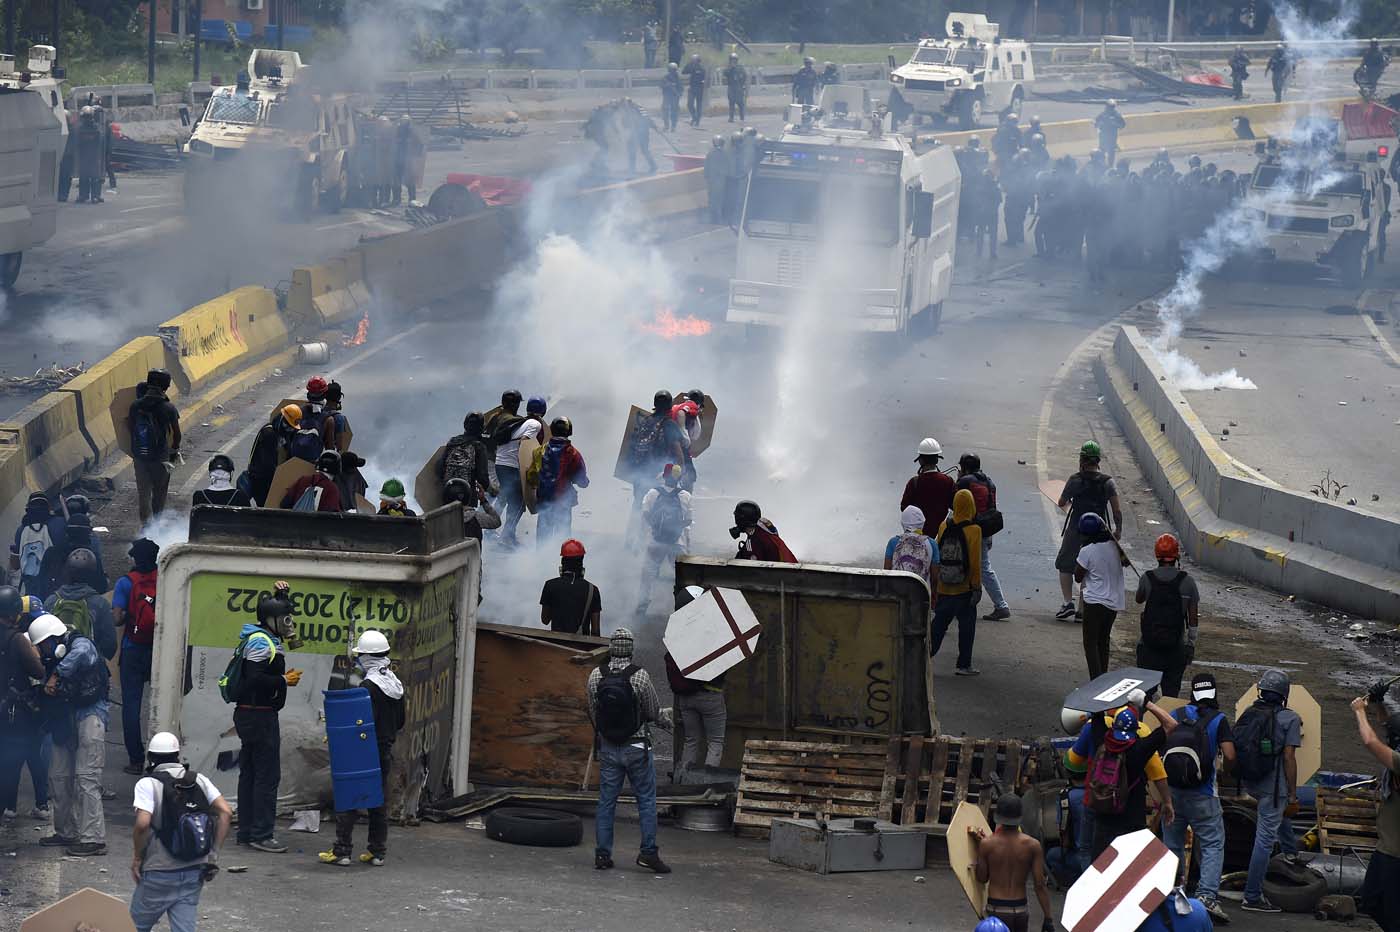 Opposition activists clash with riot police during a protest against Venezuelan President Nicolas Maduro, in Caracas on May 3, 2017. Venezuela's angry opposition rallied Wednesday vowing huge street protests against President Nicolas Maduro's plan to rewrite the constitution and accusing him of dodging elections to cling to power despite deadly unrest. / AFP PHOTO / JUAN BARRETO